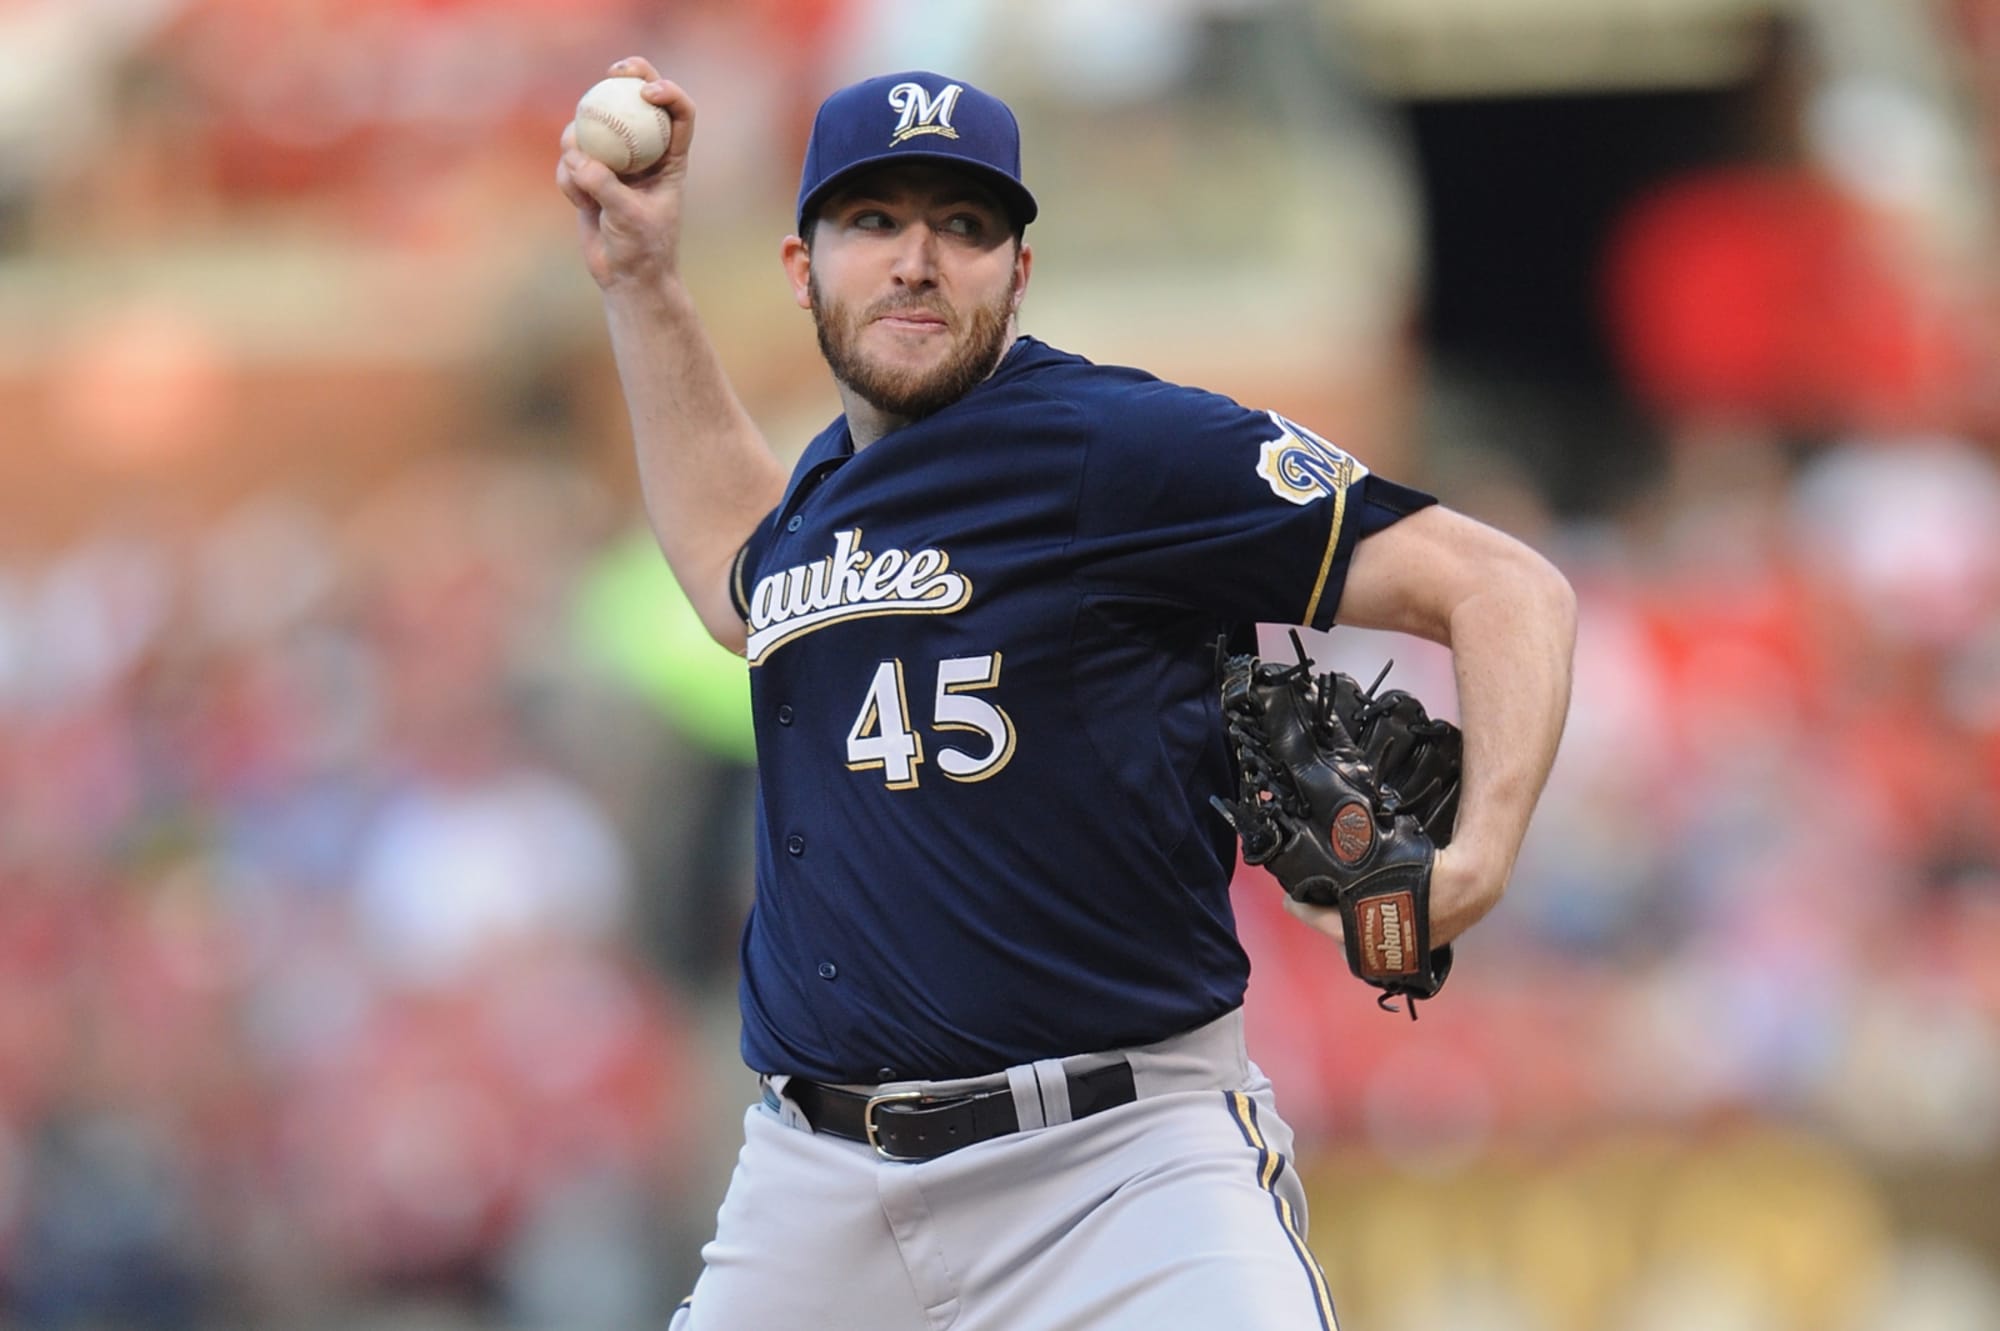 10 questions with former Milwaukee Brewers pitcher Tyler Cravy